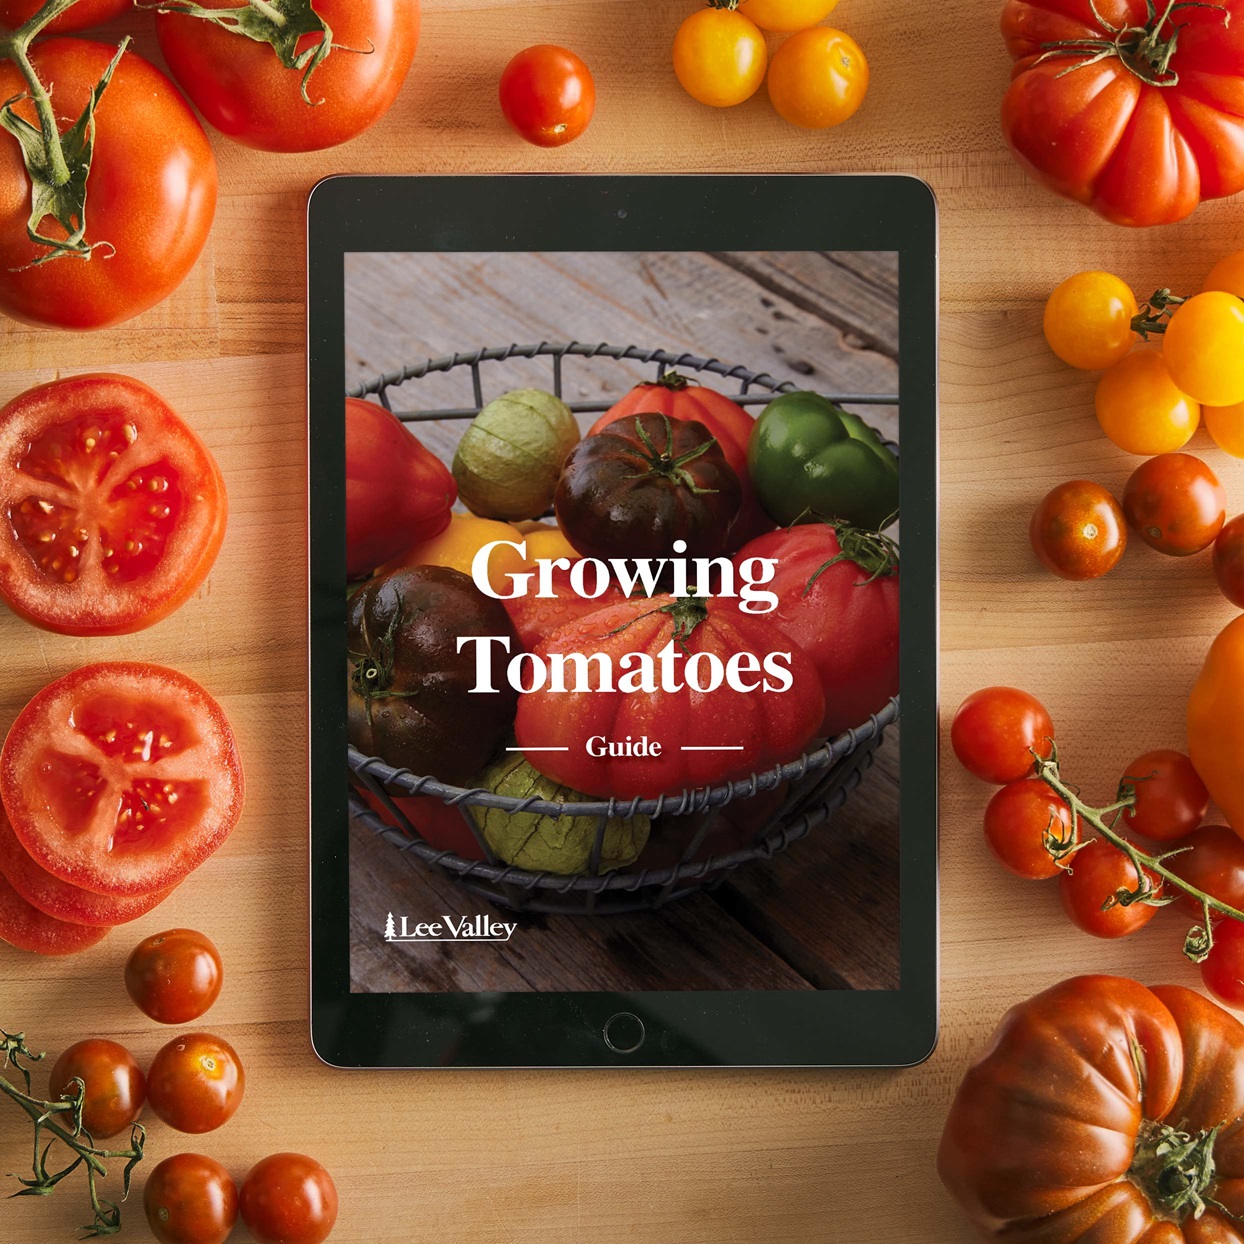 Guide: Growing Tomatoes